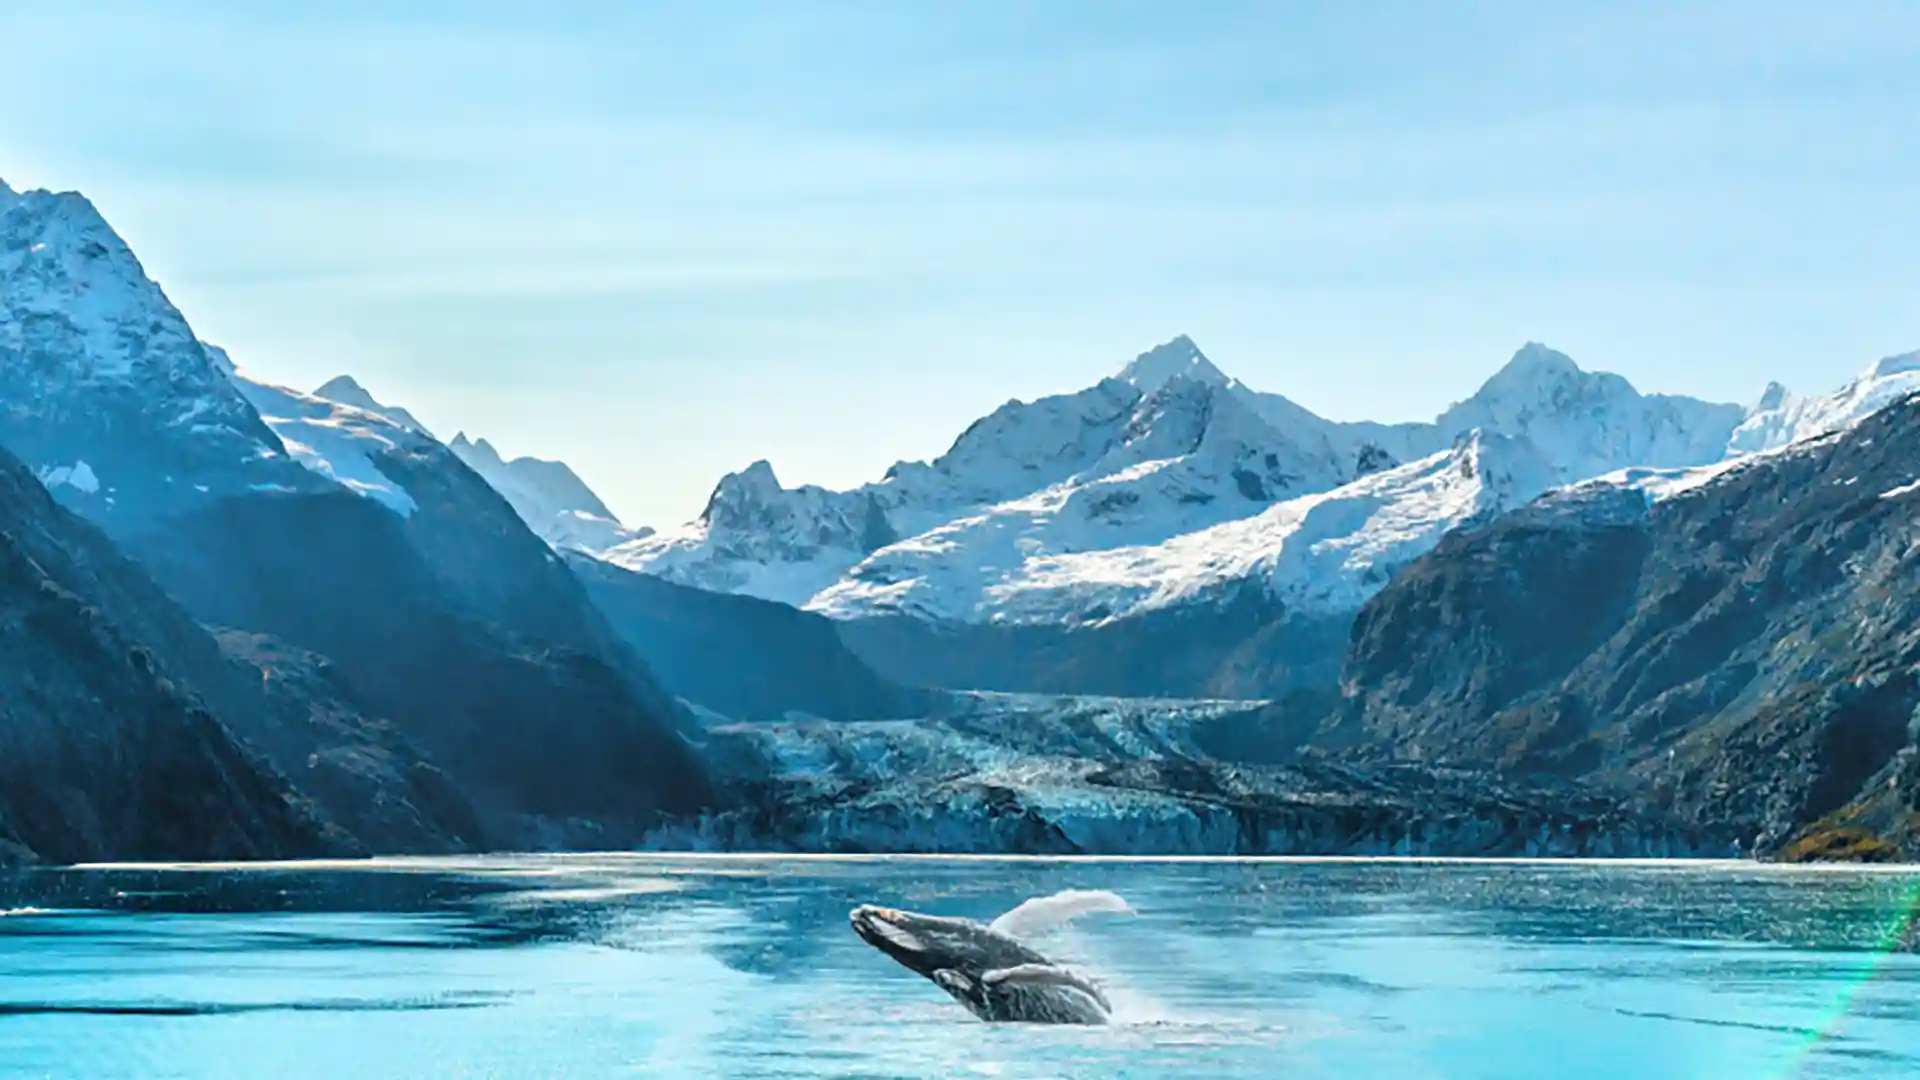 View of whale jumping out of water in Glacier Bay, Alaska, surrounded by icy-blue glaciers.